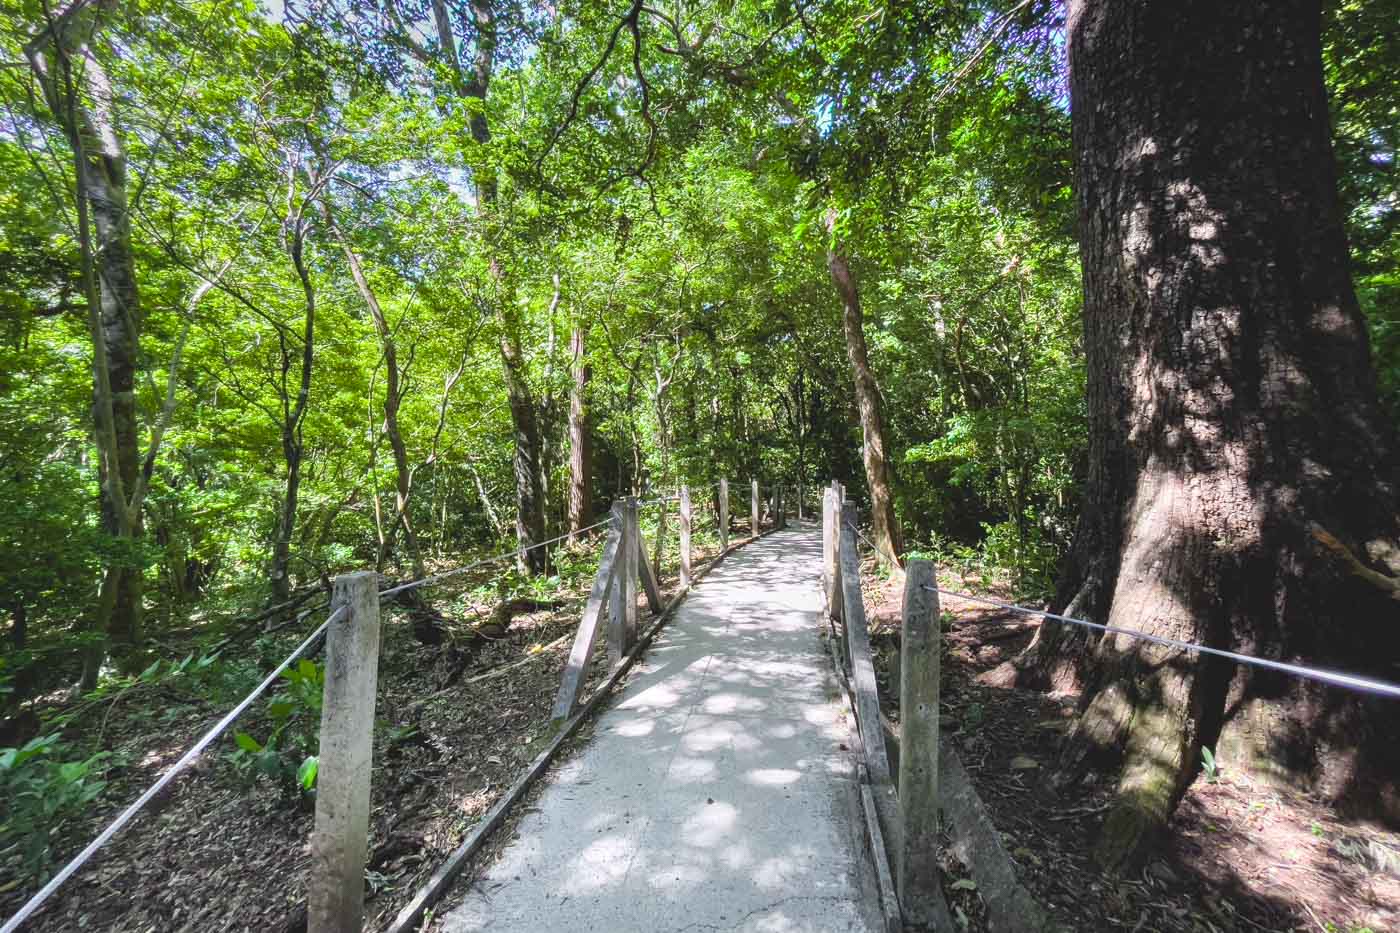 A marked trail running through the forests of Rincon de la Vieja National Park.